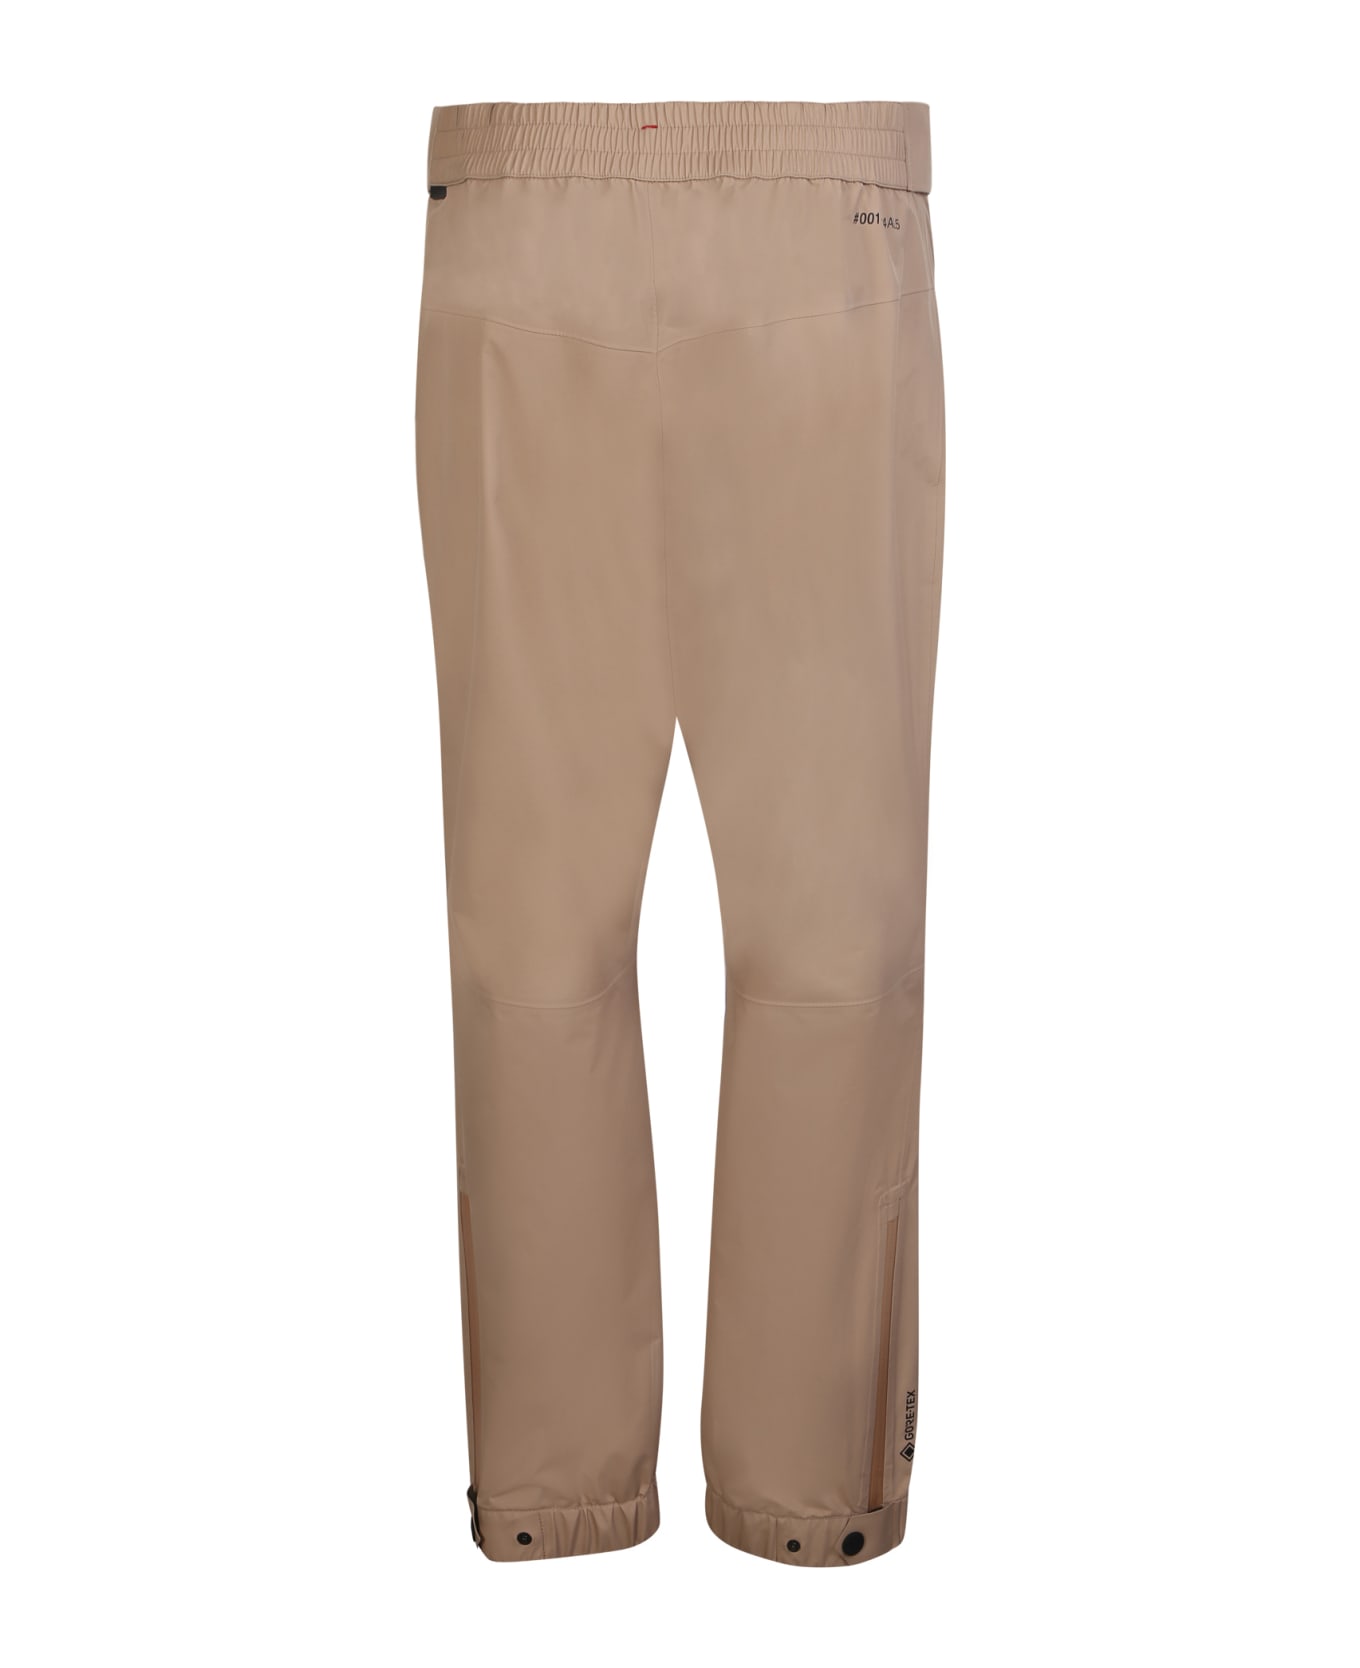 Moncler Grenoble Day-namic Shell Beige Trousers - Beige